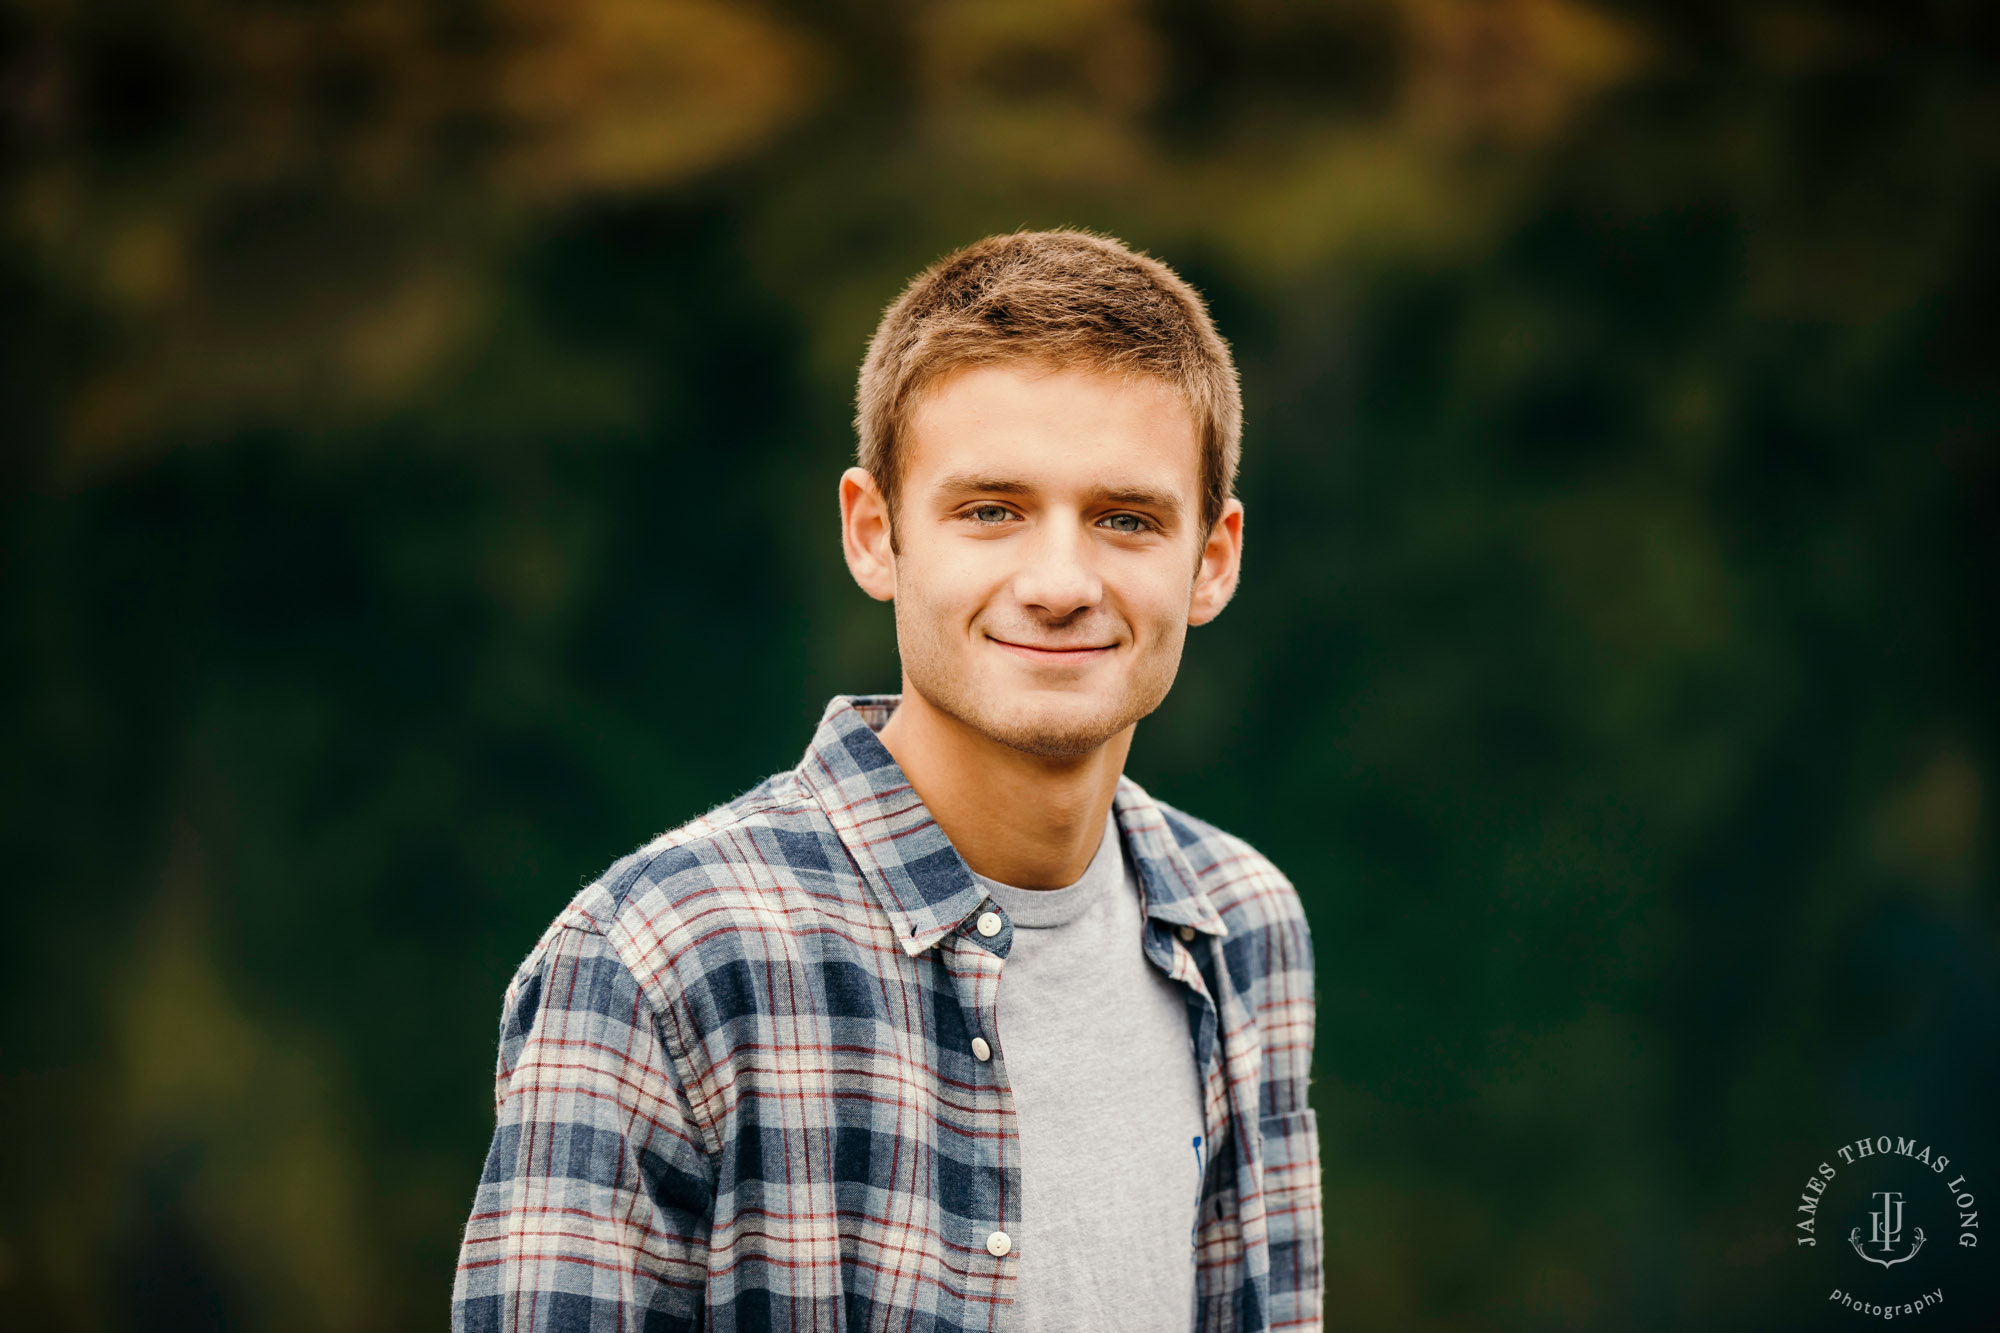 Seattle senior portrait photography session by James Thomas Long Photography